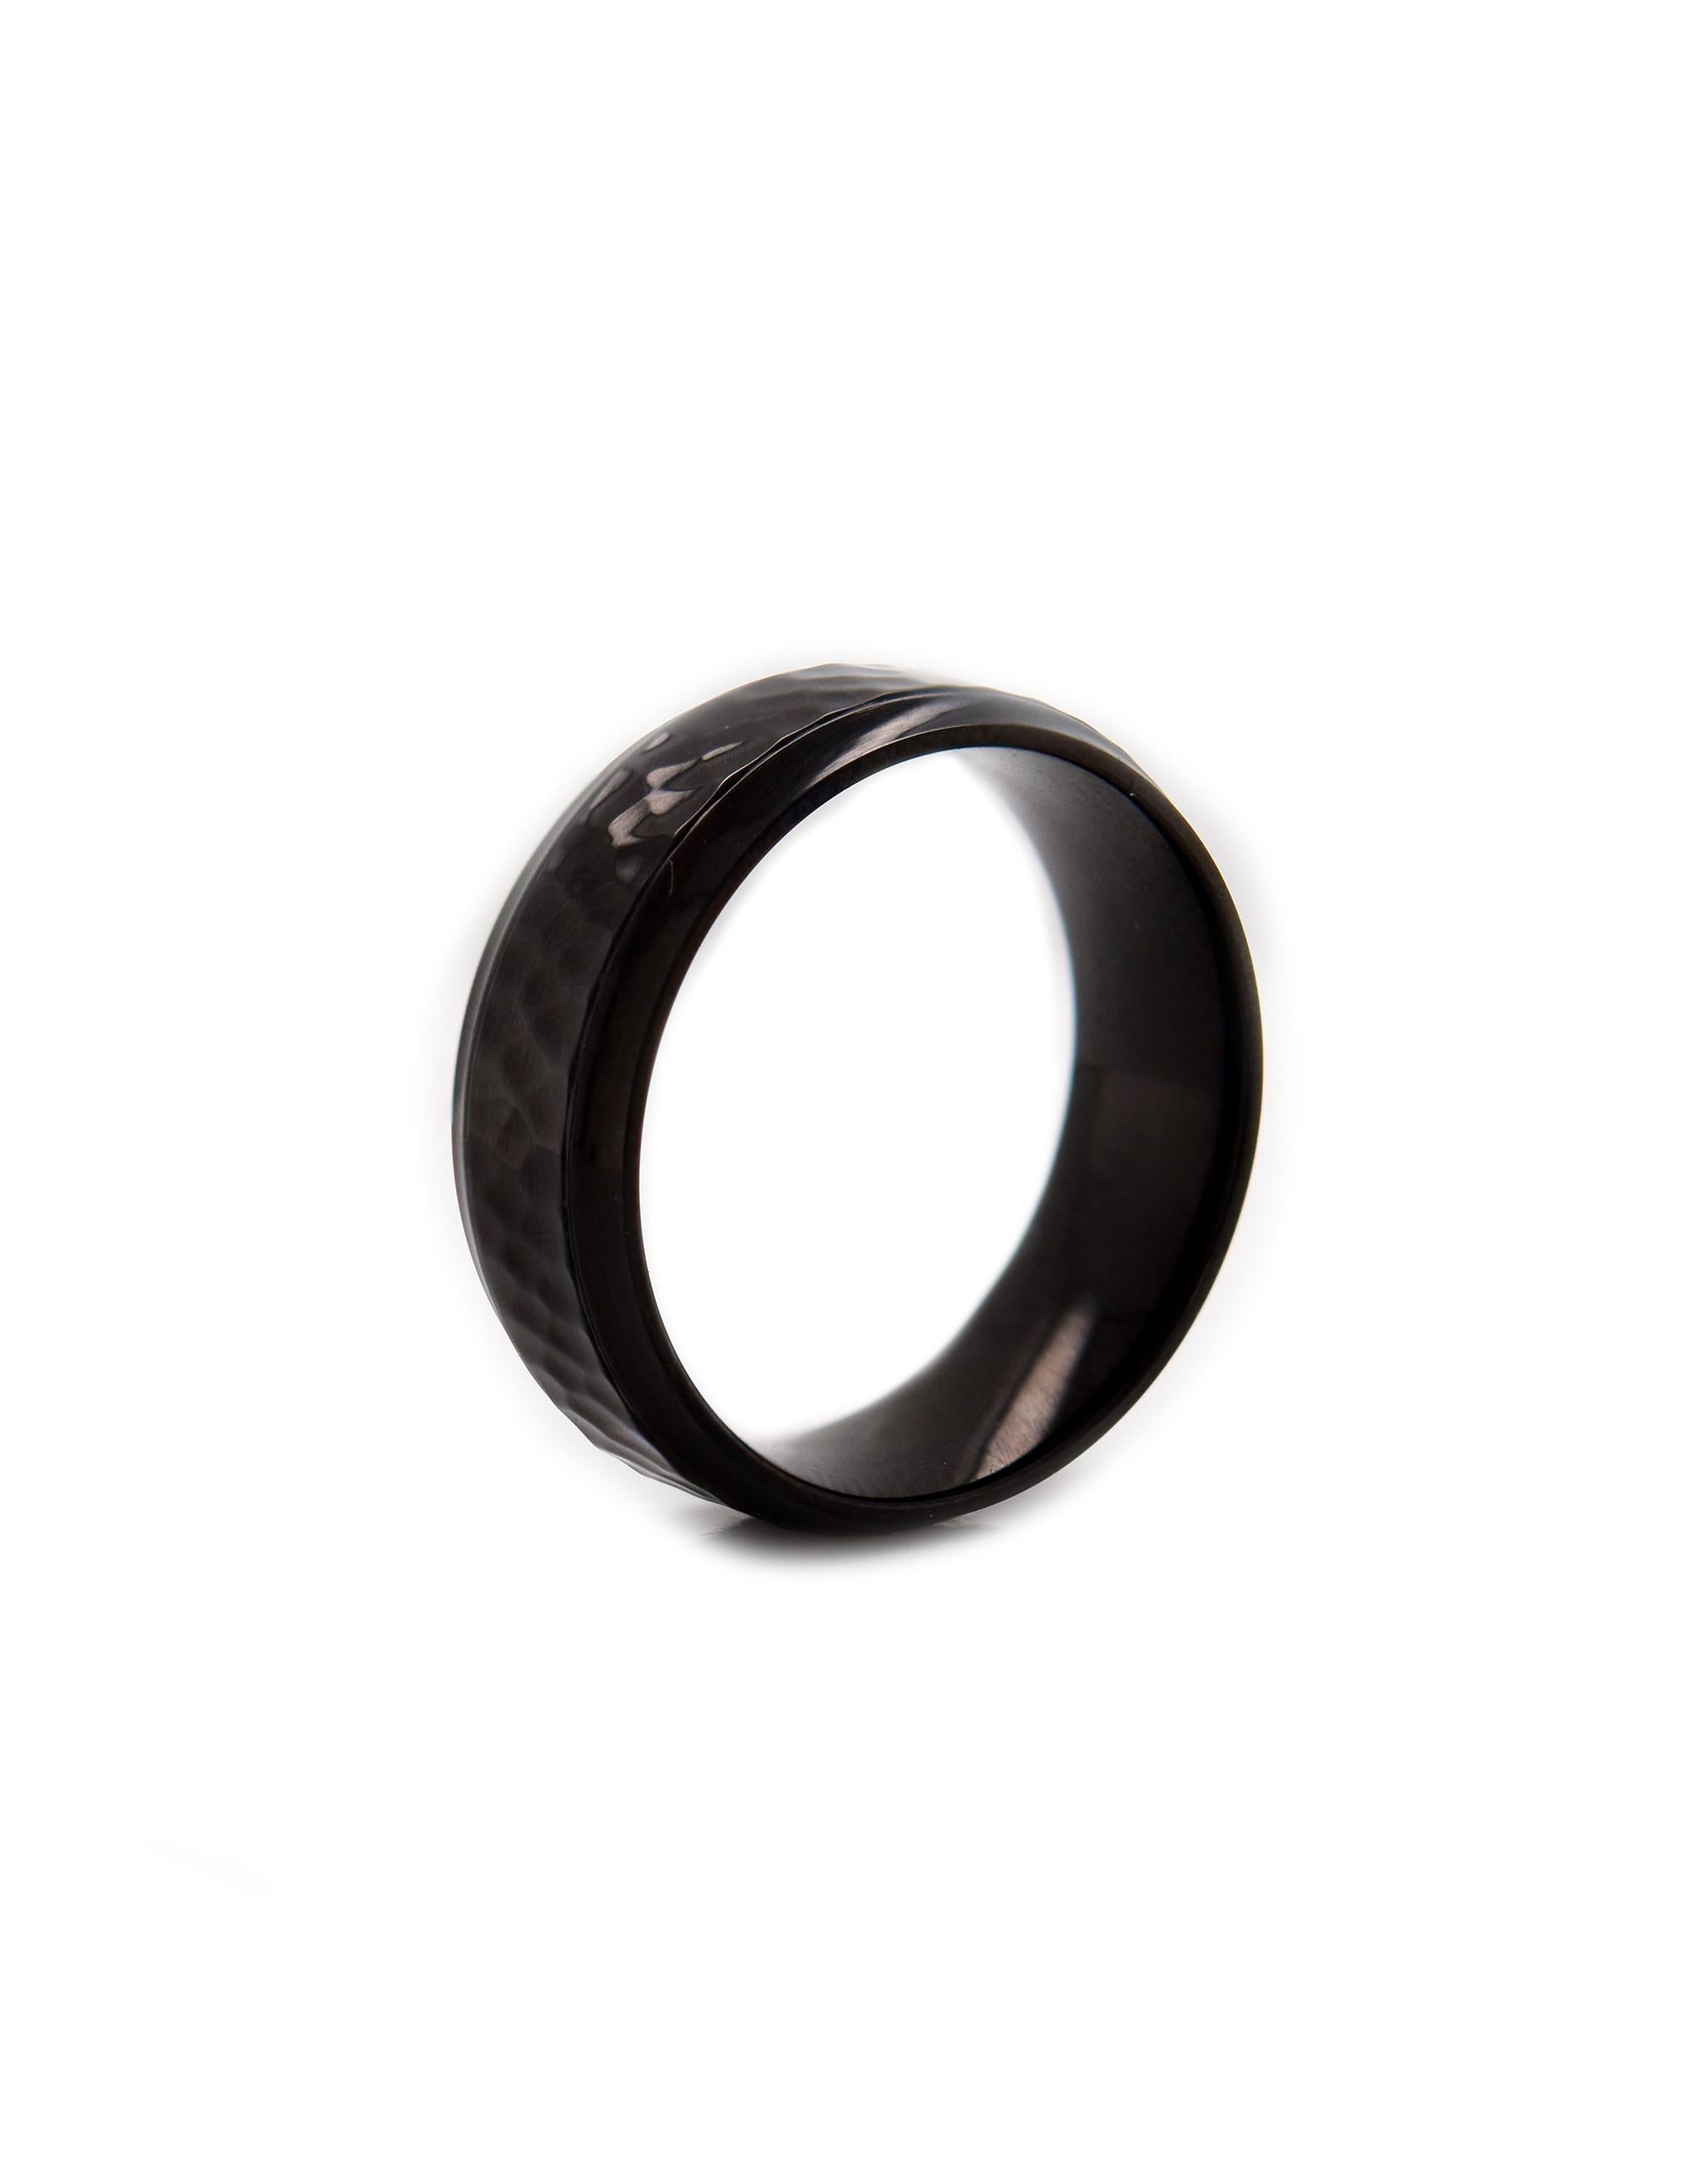 qg stainless steel ring